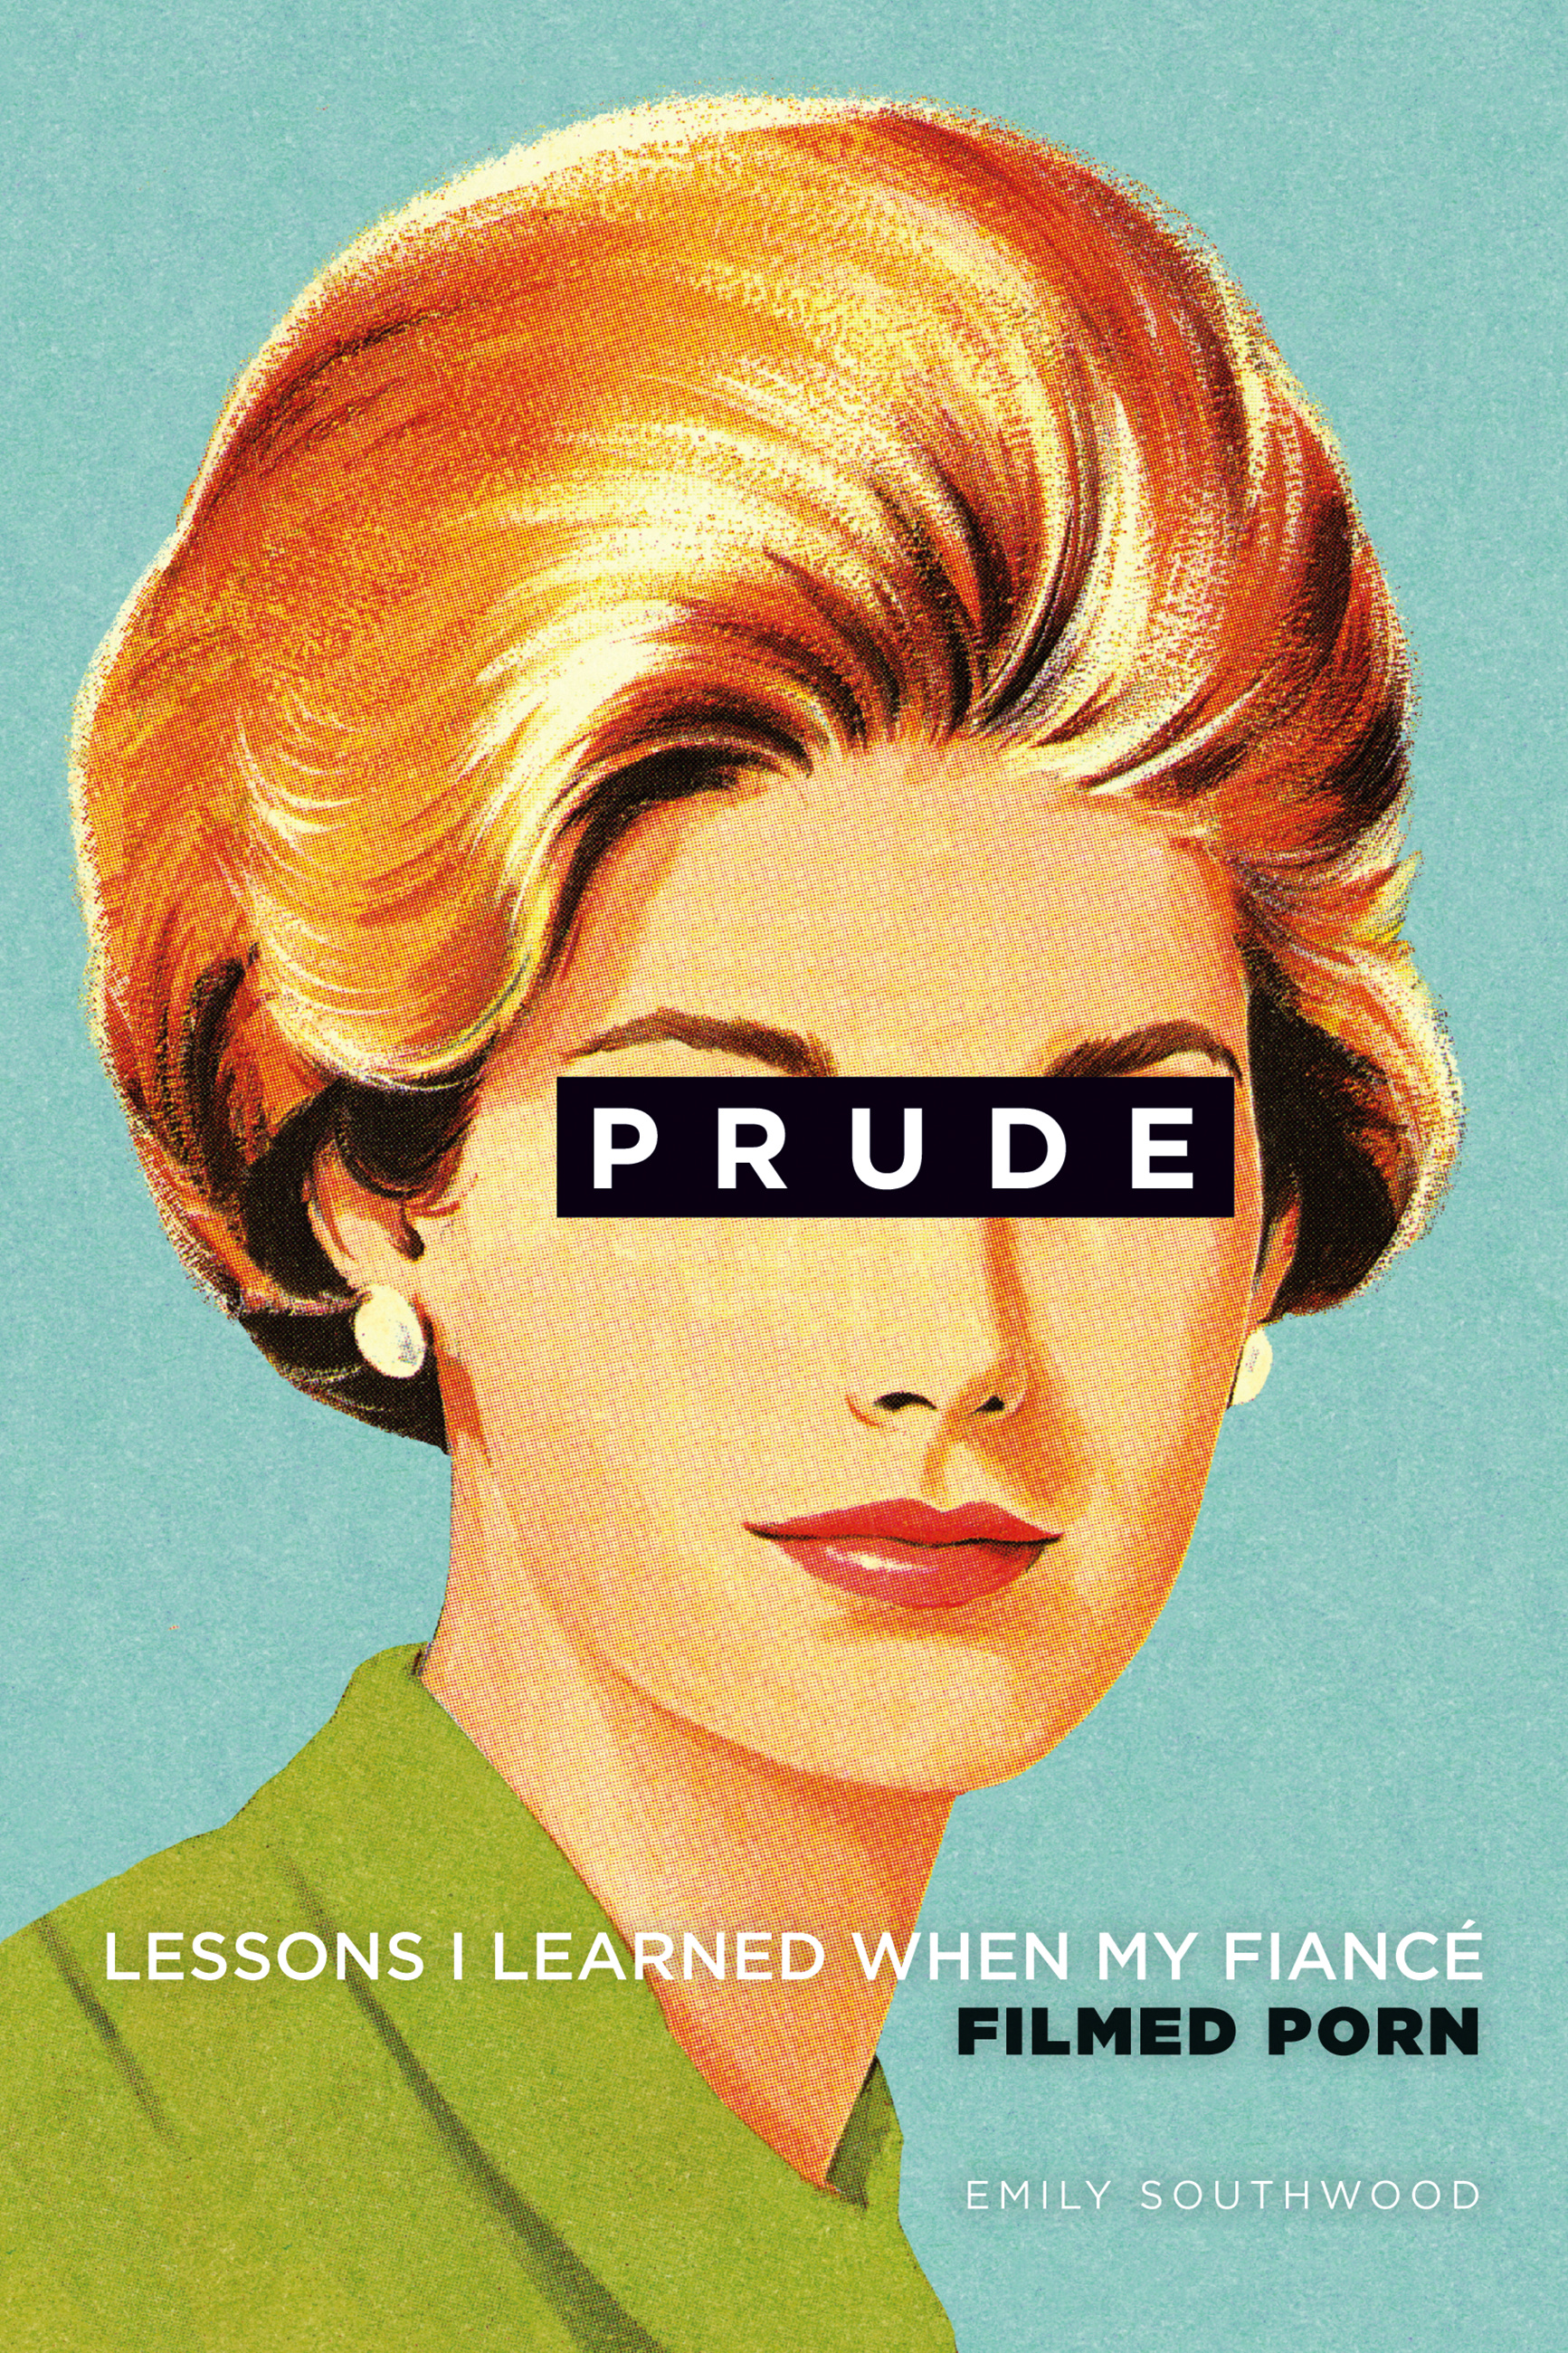 Prude by Emily Southwood Hachette Book Group